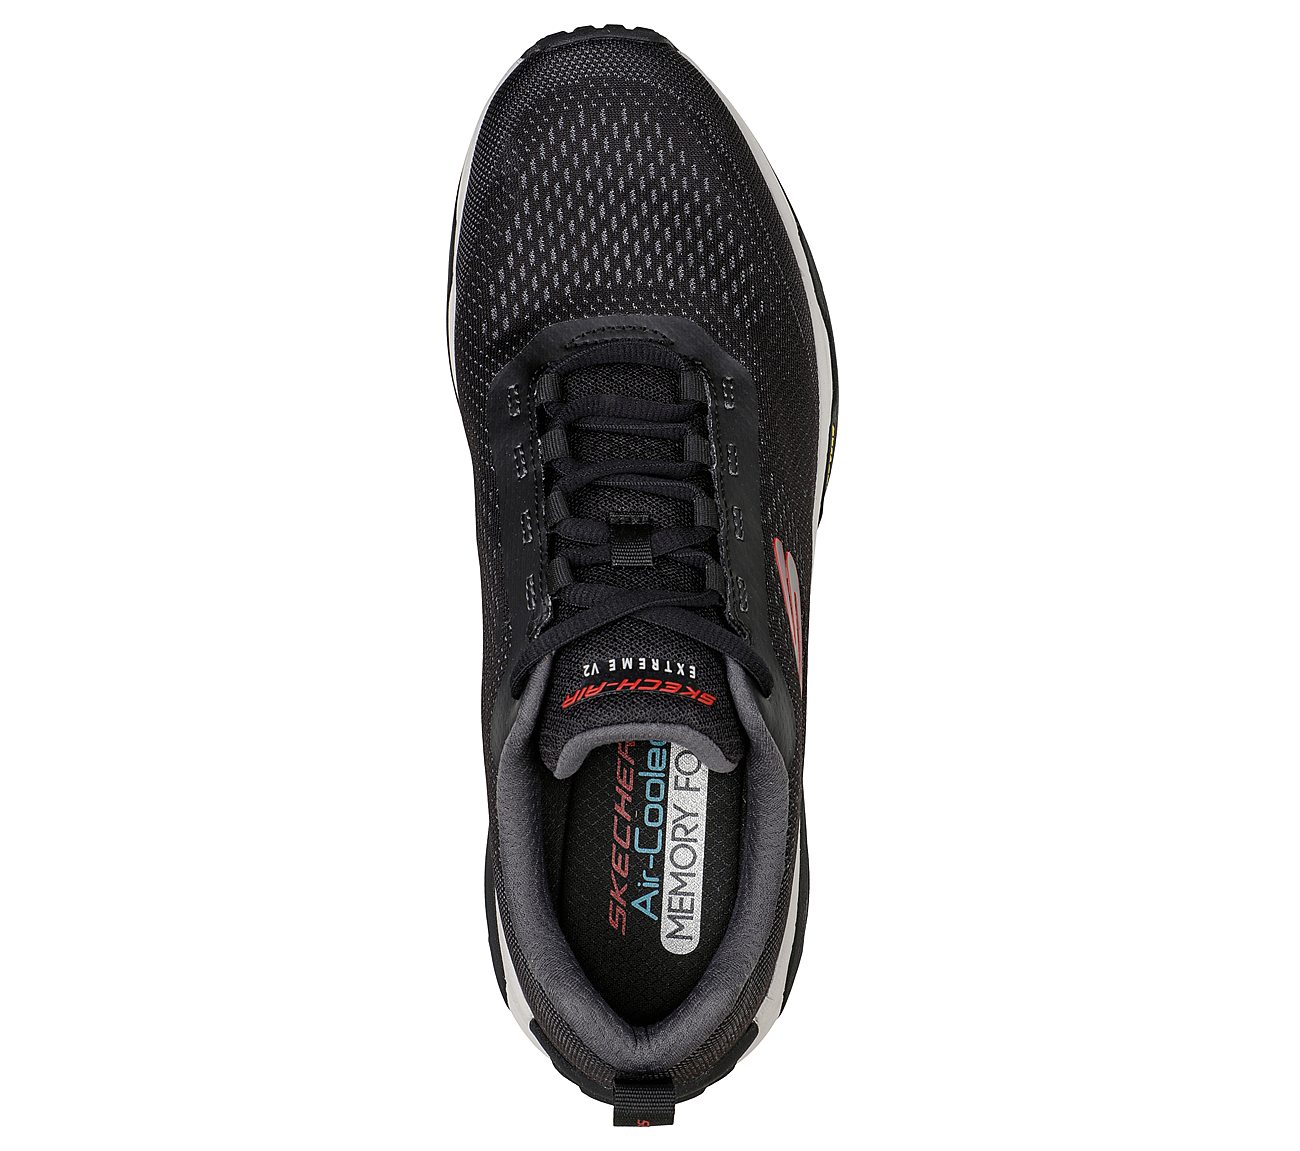 SKECH-AIR EXTREME V2 - TRIDEN, BLACK/RED Footwear Top View